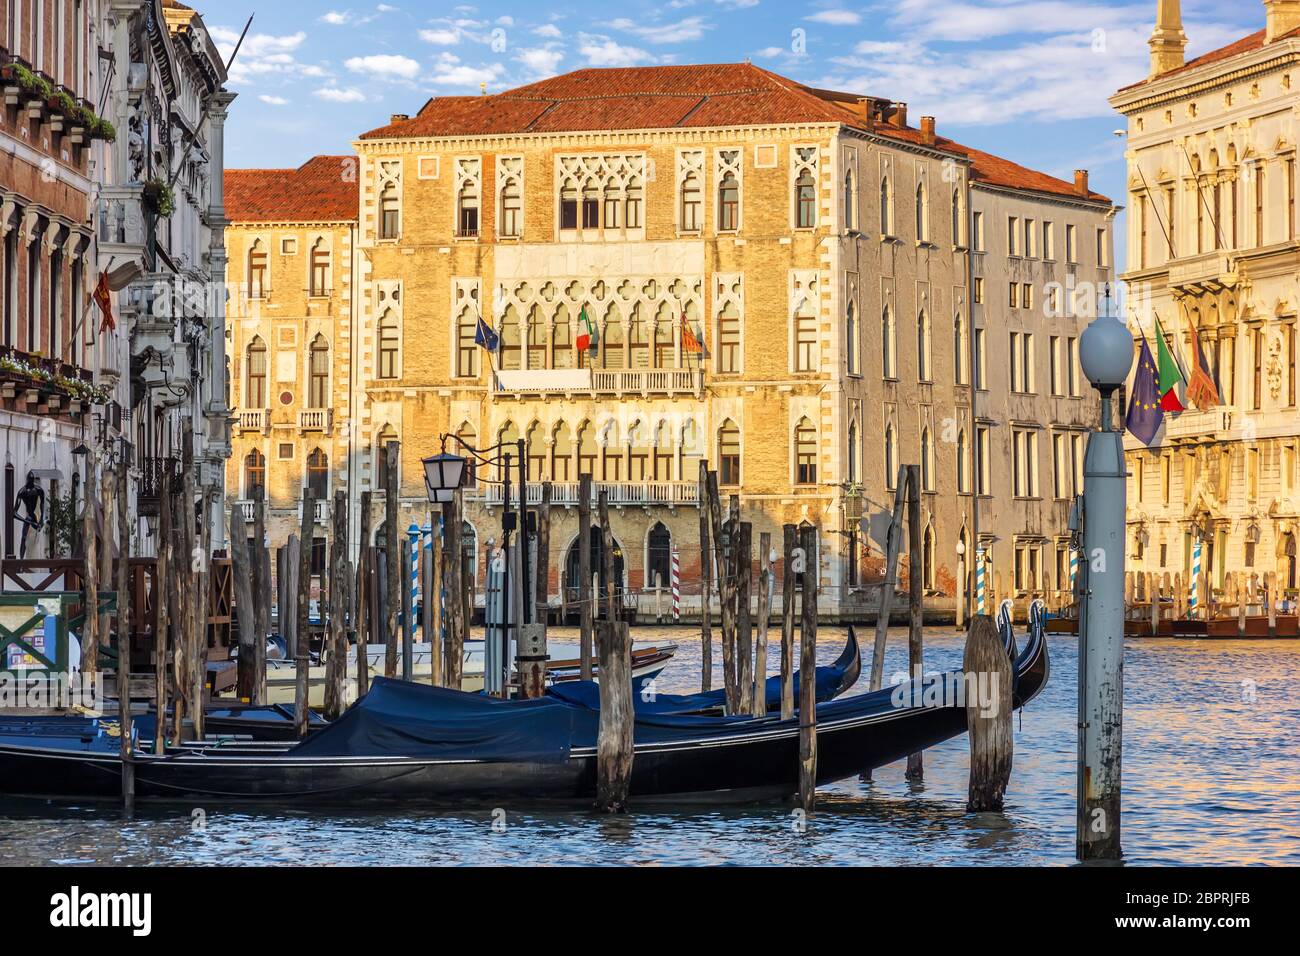 Gondolas moored in the Grand Canal near the University of Venice. Stock Photo